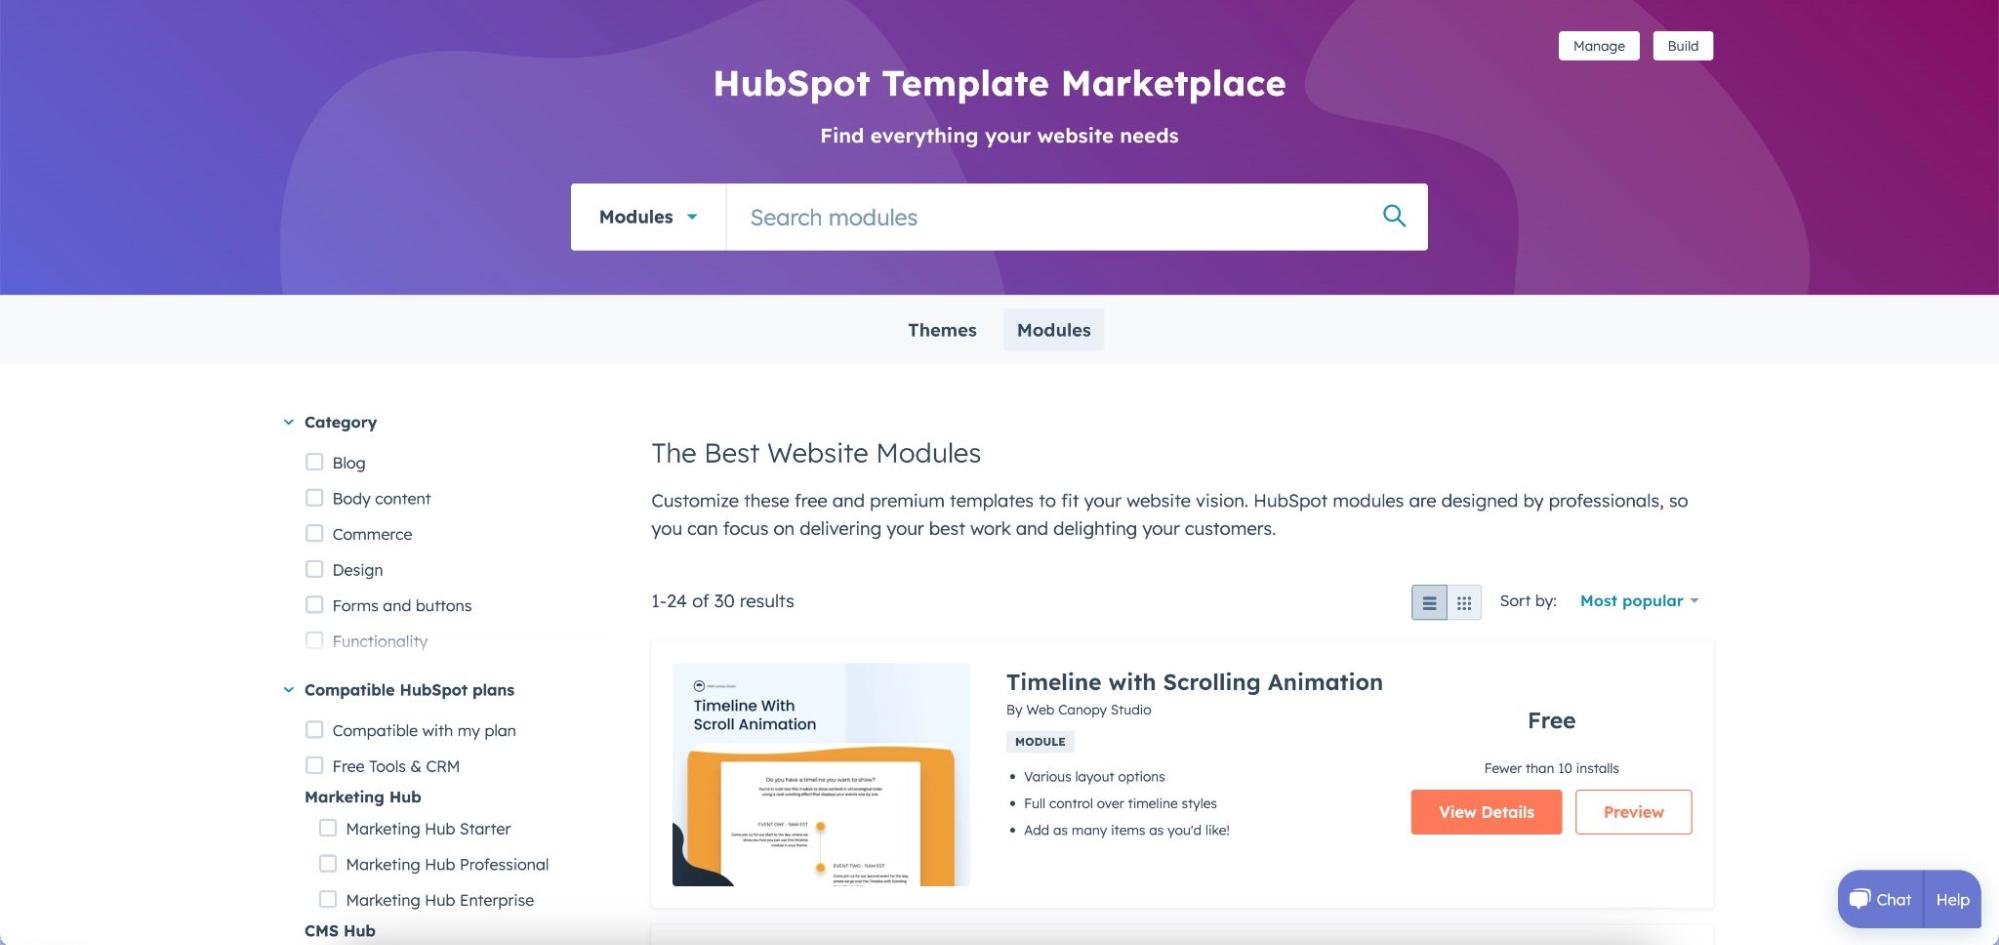 The new template marketplace homepage